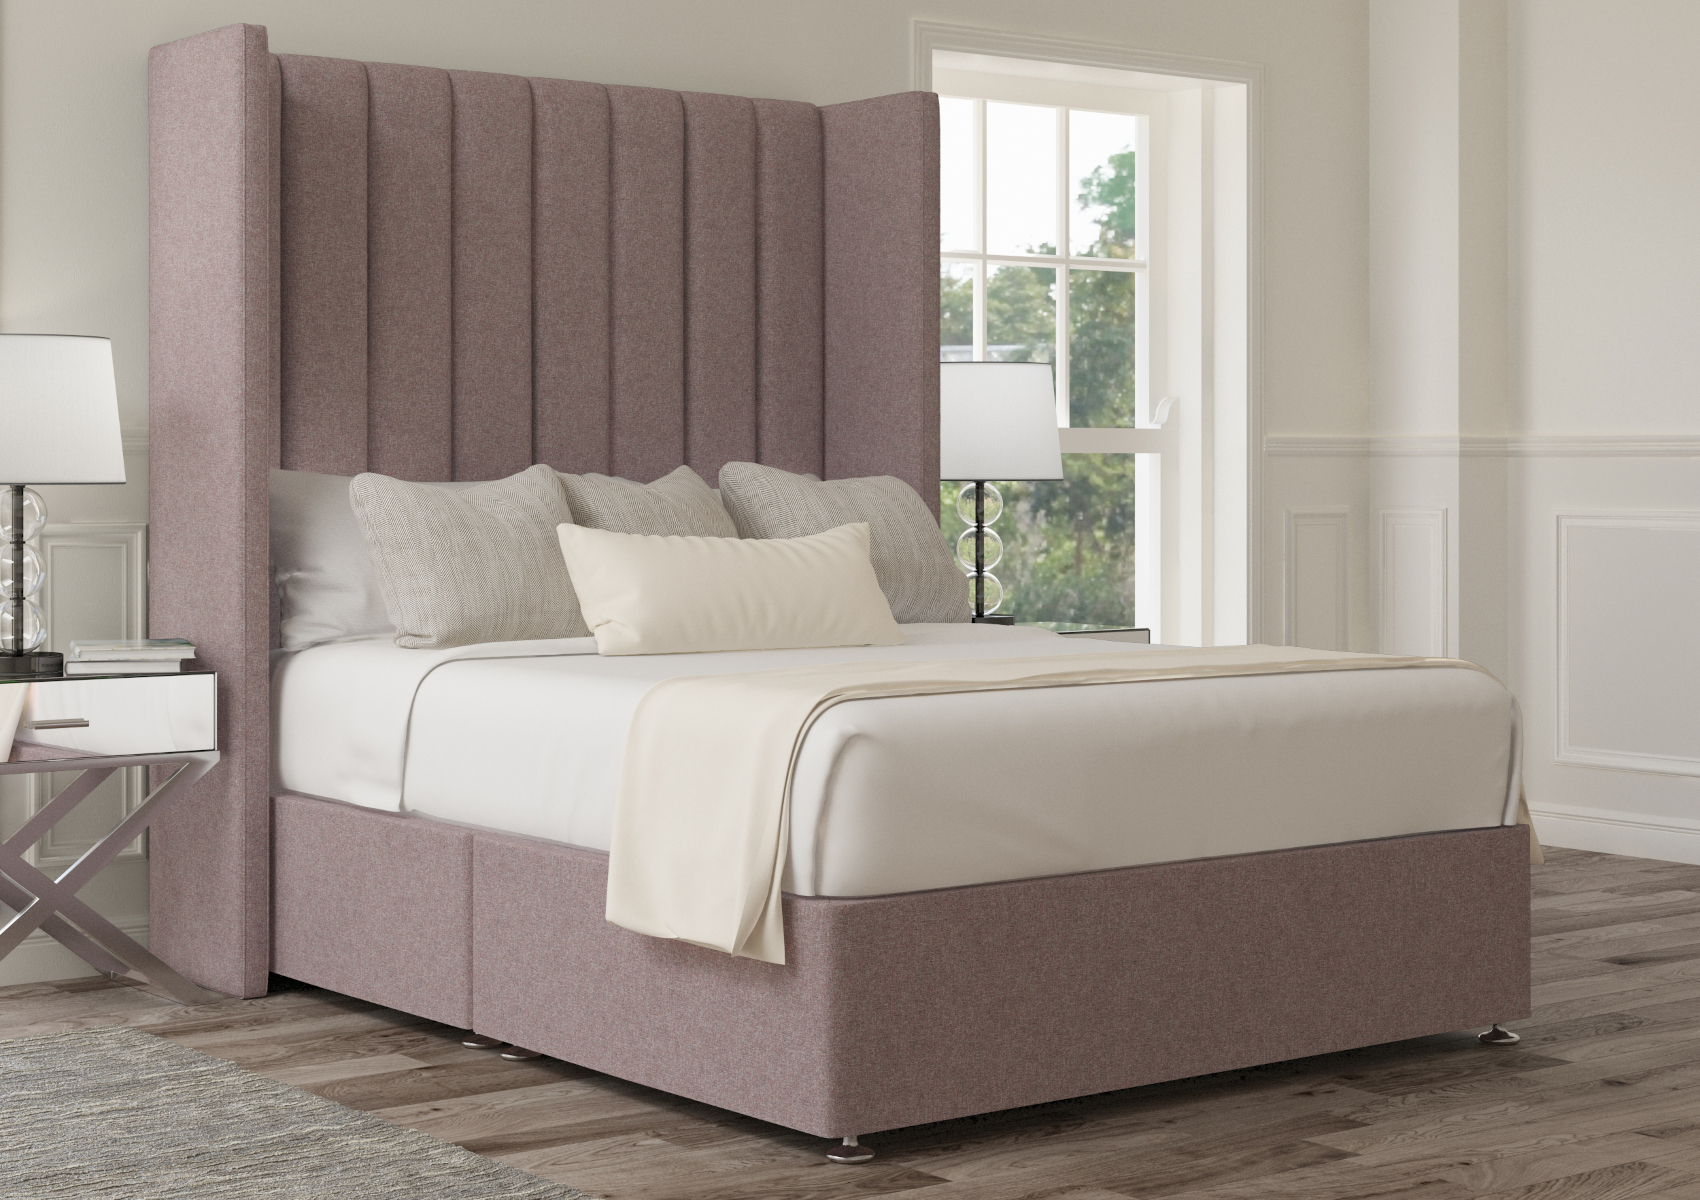 View Lola Trebla Stone Upholstered Double Winged Bed Time4Sleep information